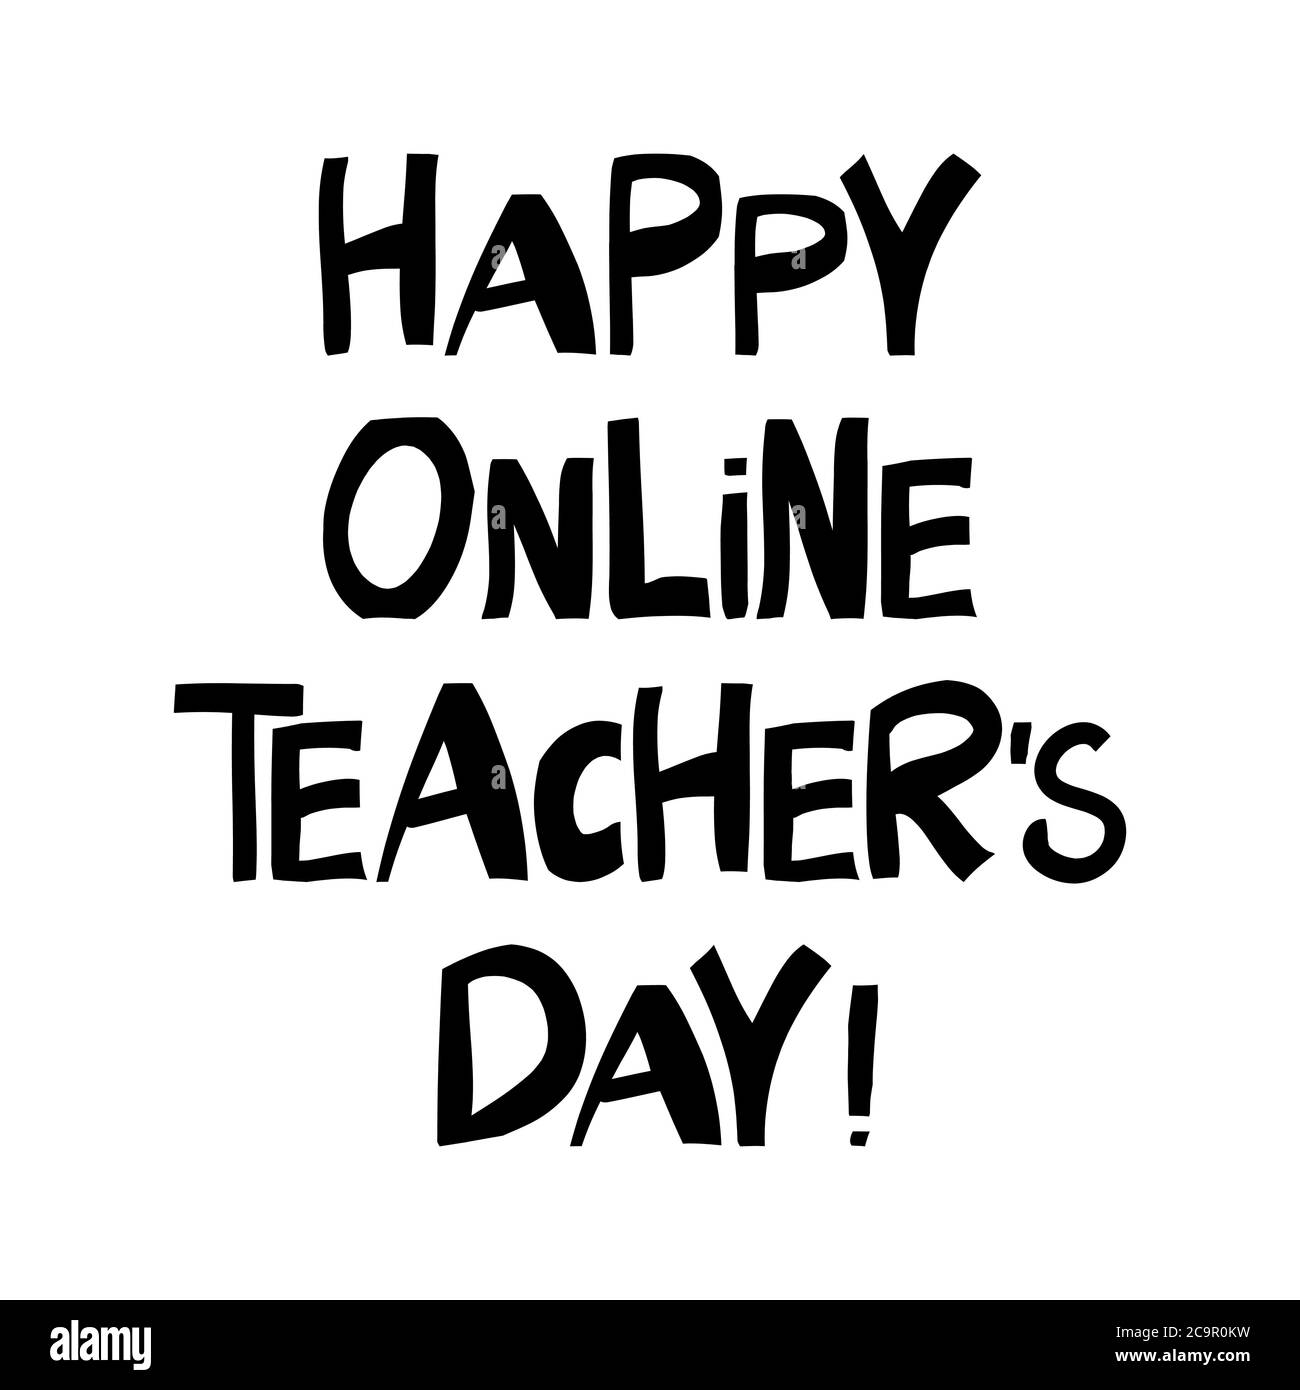 Happy online teachers day. Education quote. Cute hand drawn ...